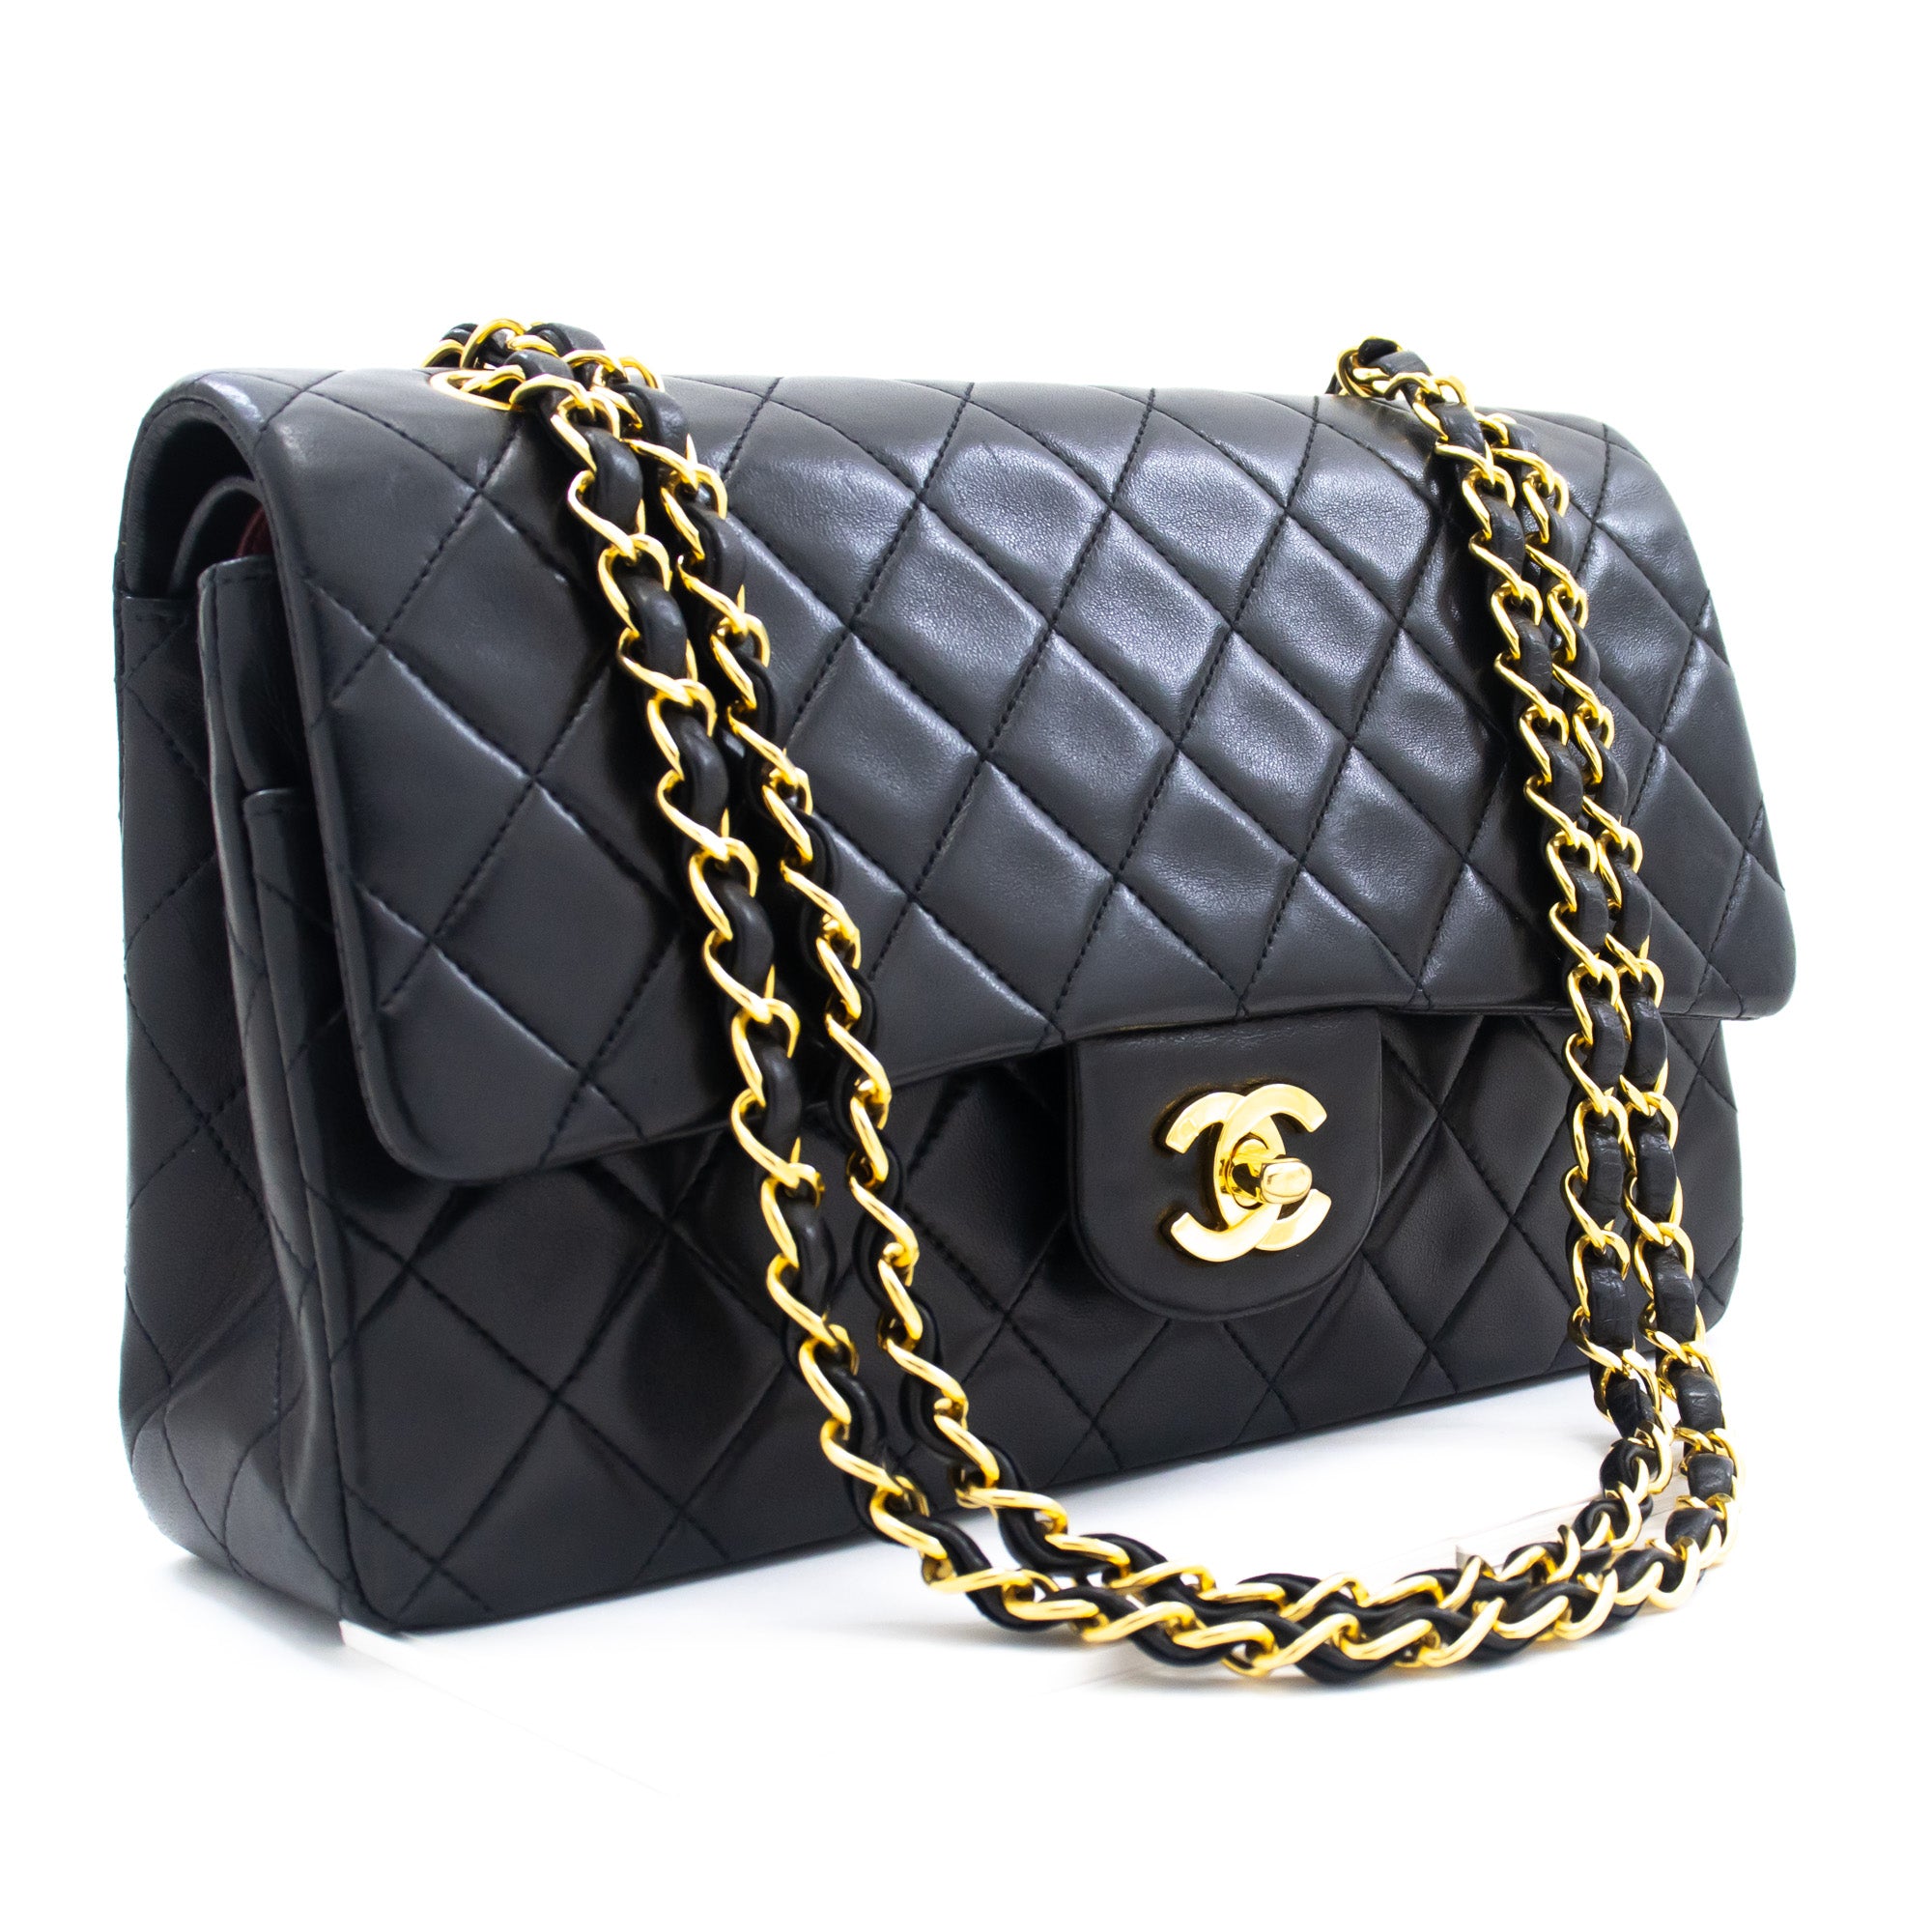 Chanel Classic Flap Bag - Design and Brief History